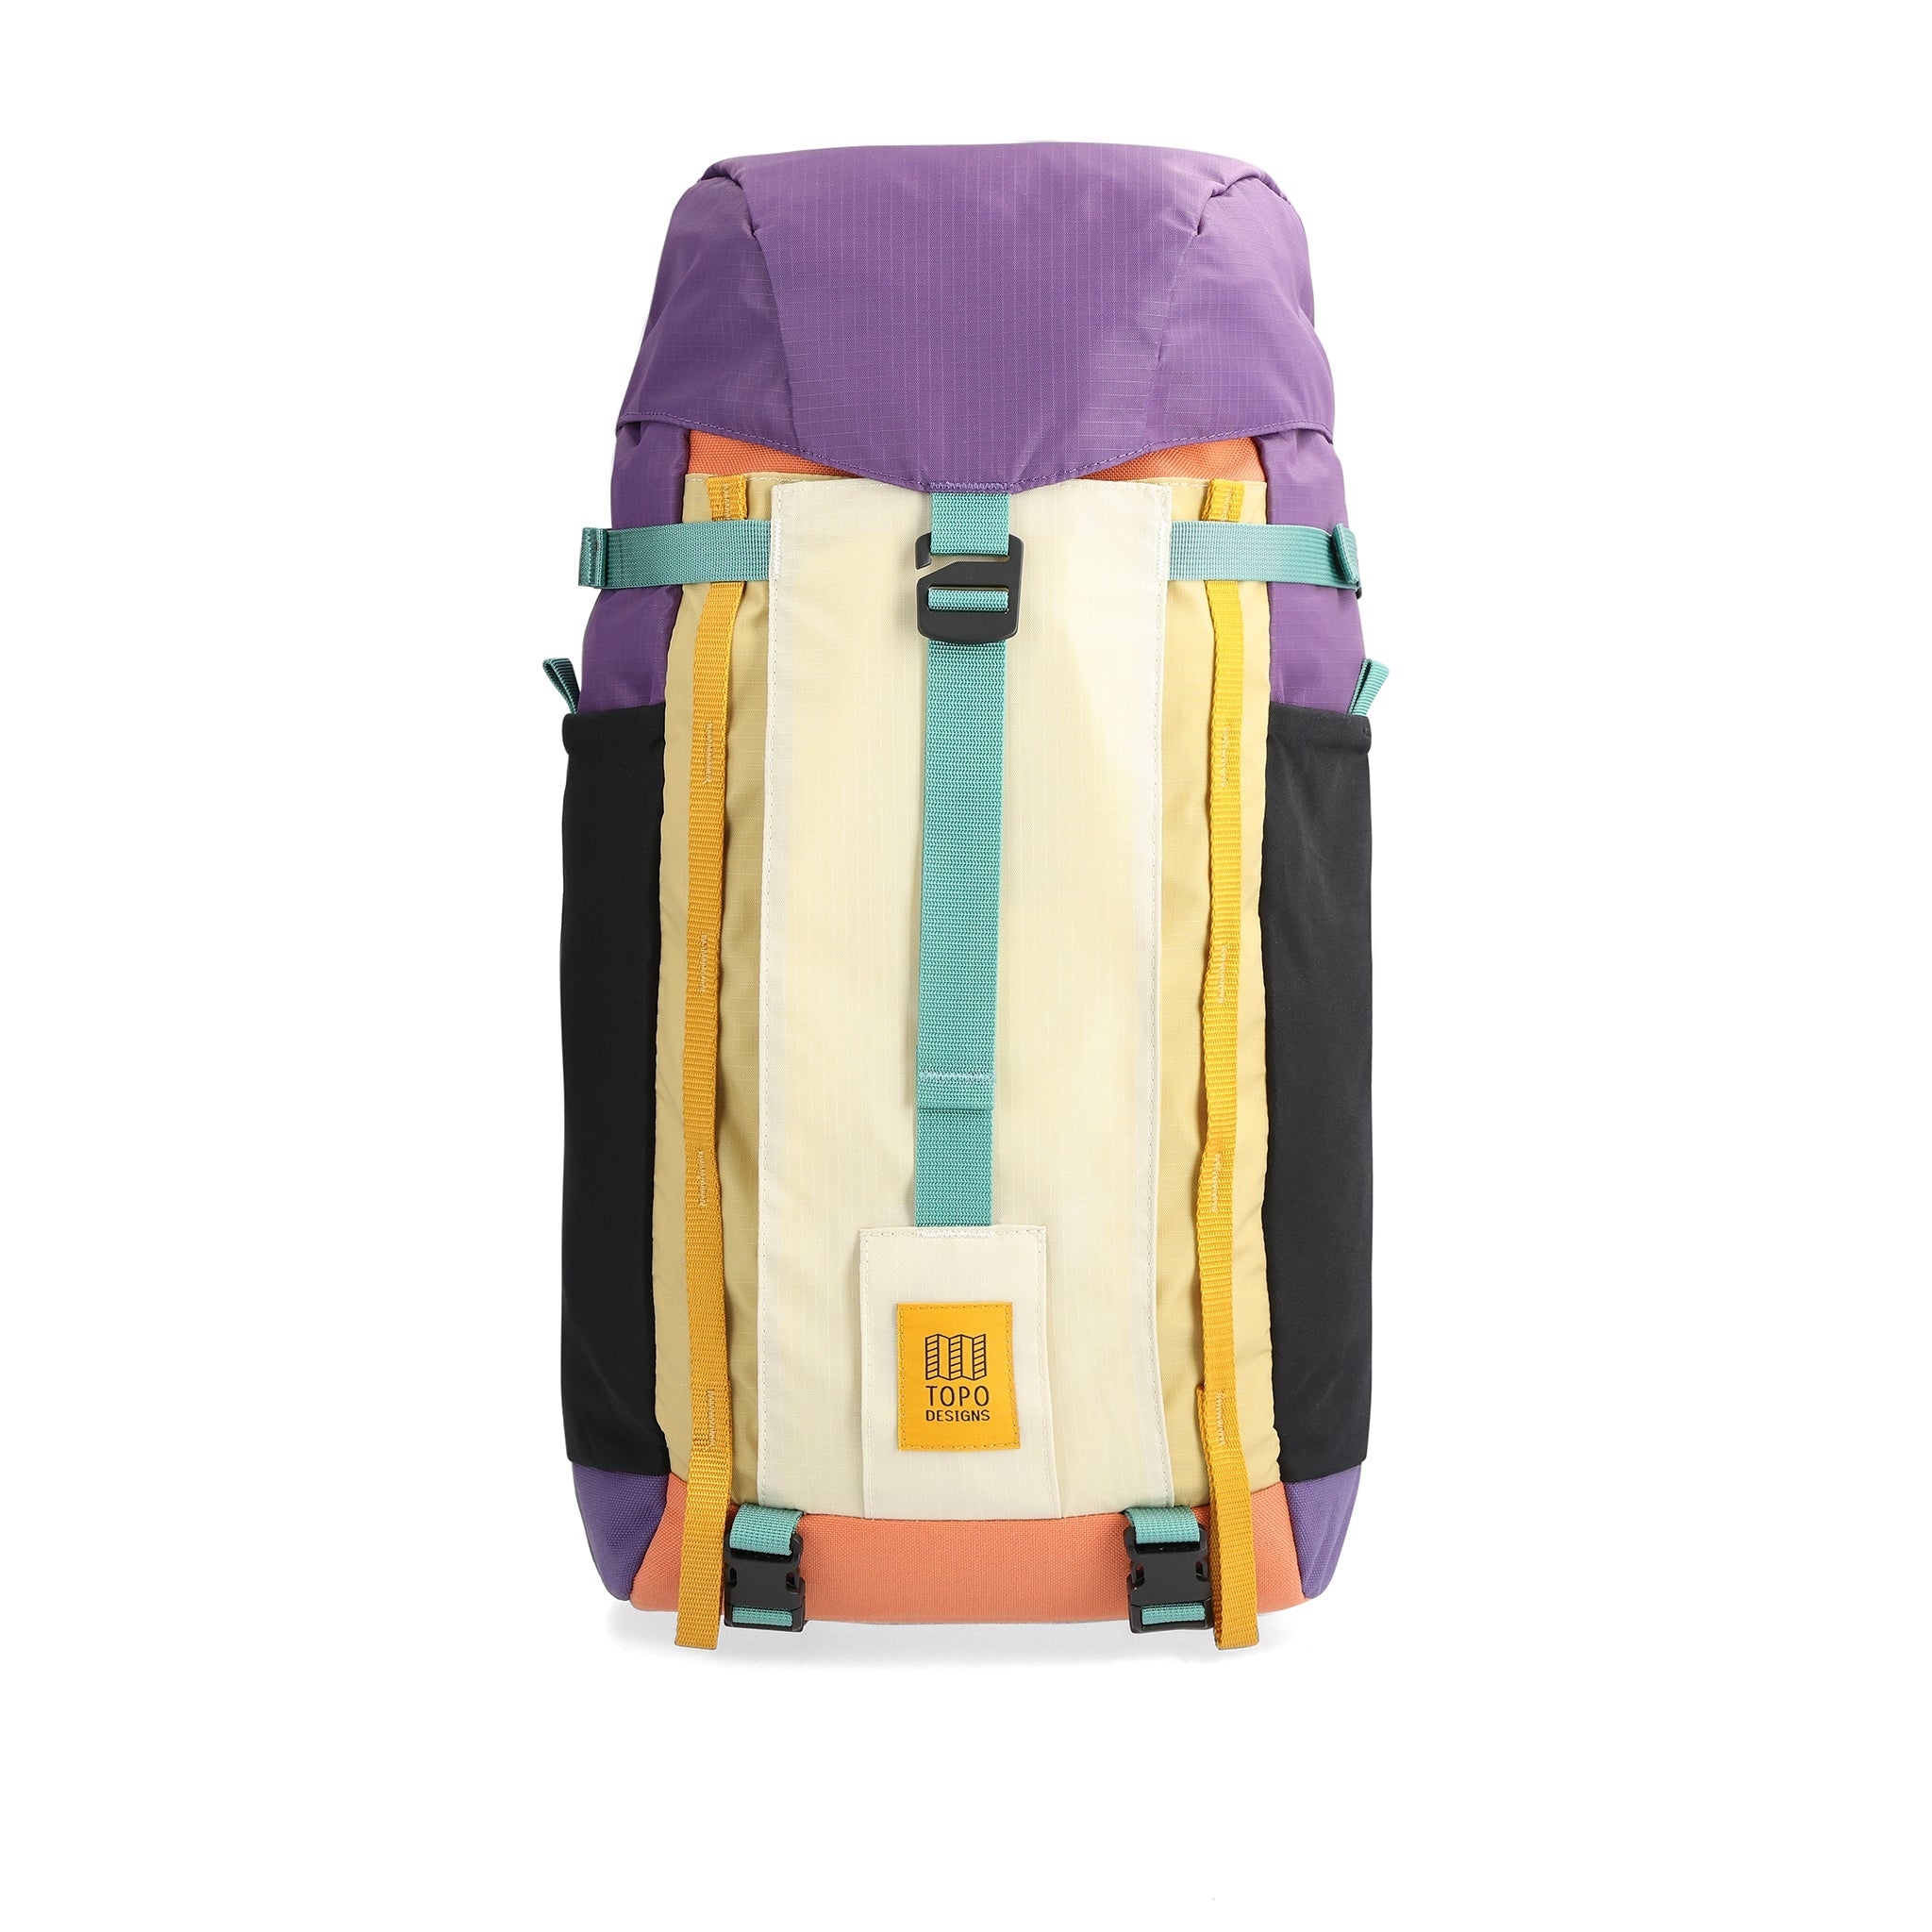 Front View of Topo Designs Mountain Pack 16L 2.0 in "Loganberry / Bone White"